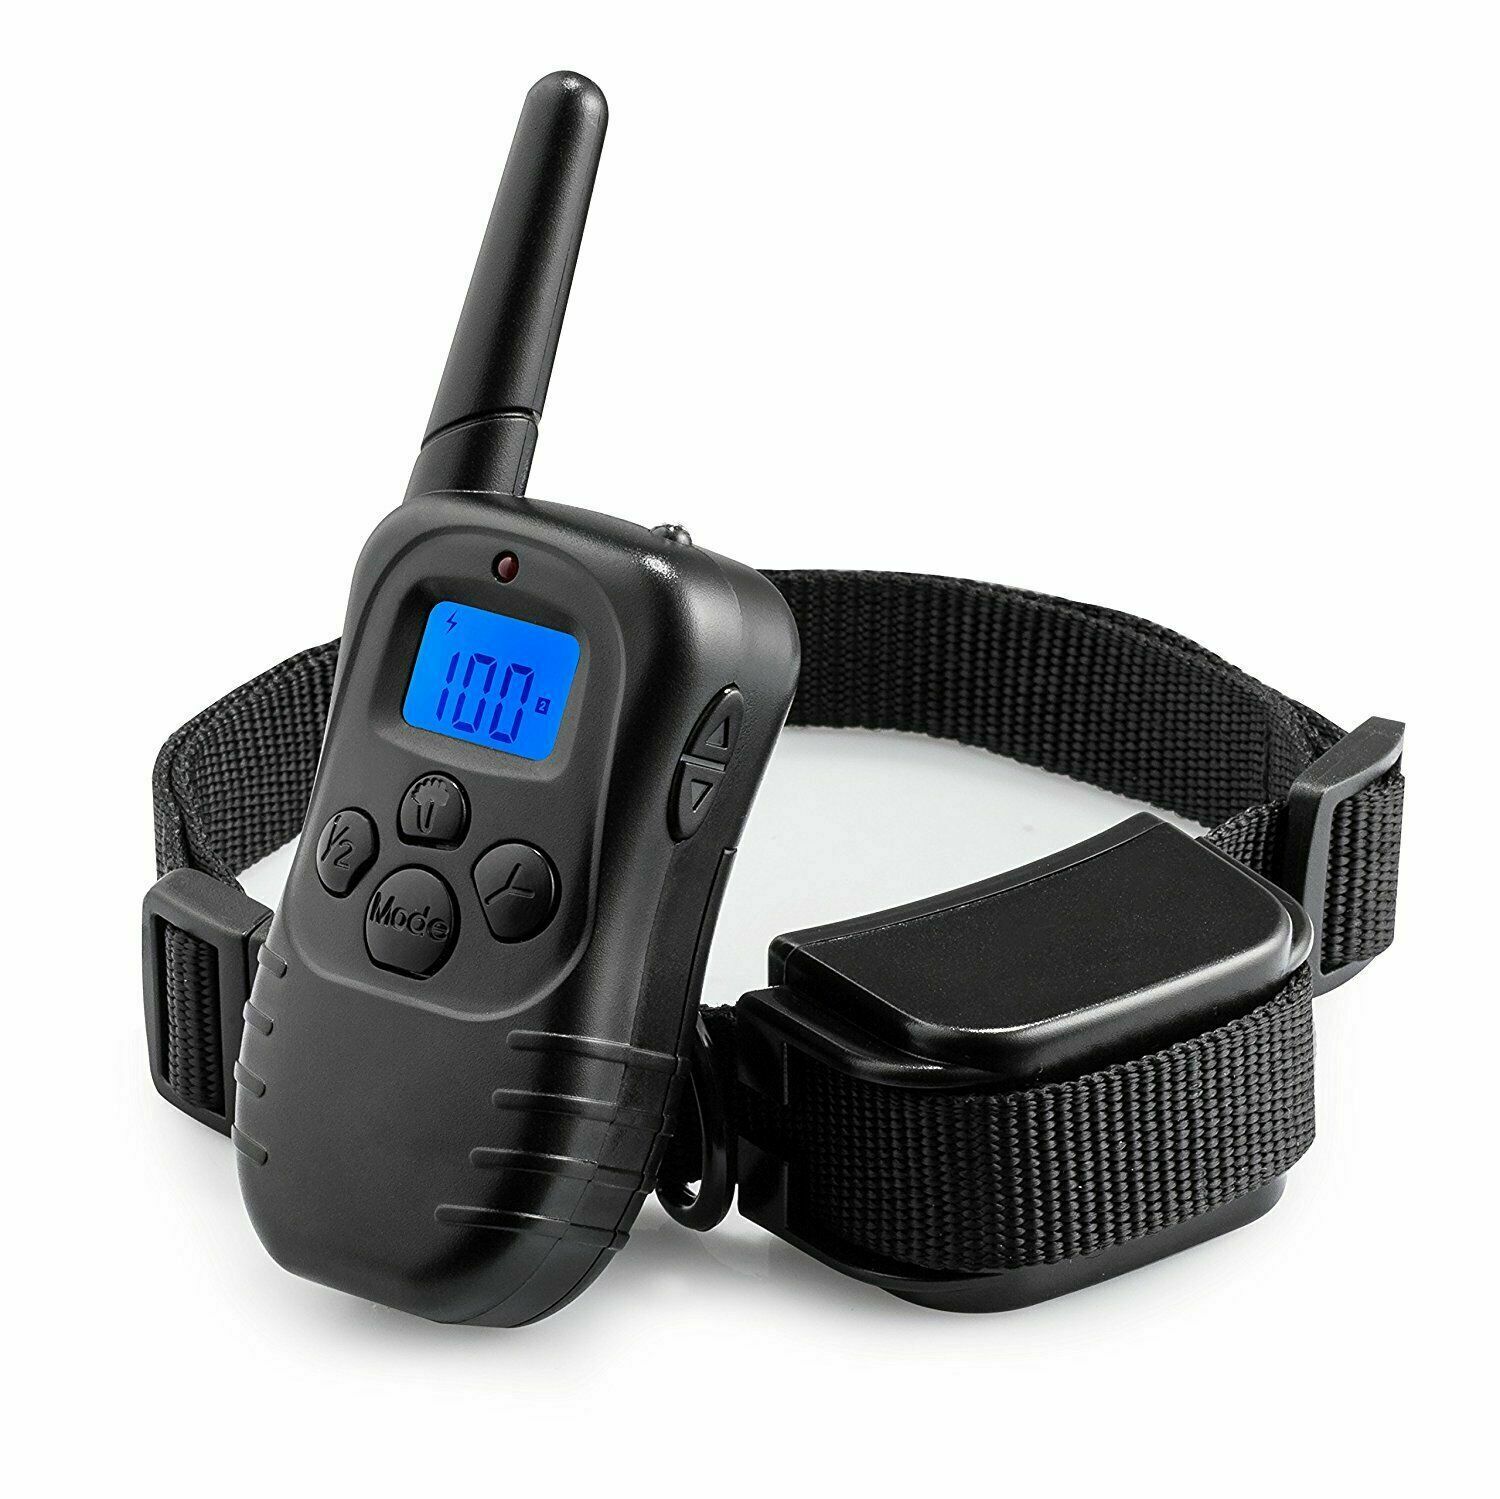 Dog Pet Electric Shock Training Collar Waterproof Rechargeable Remote 330Yard